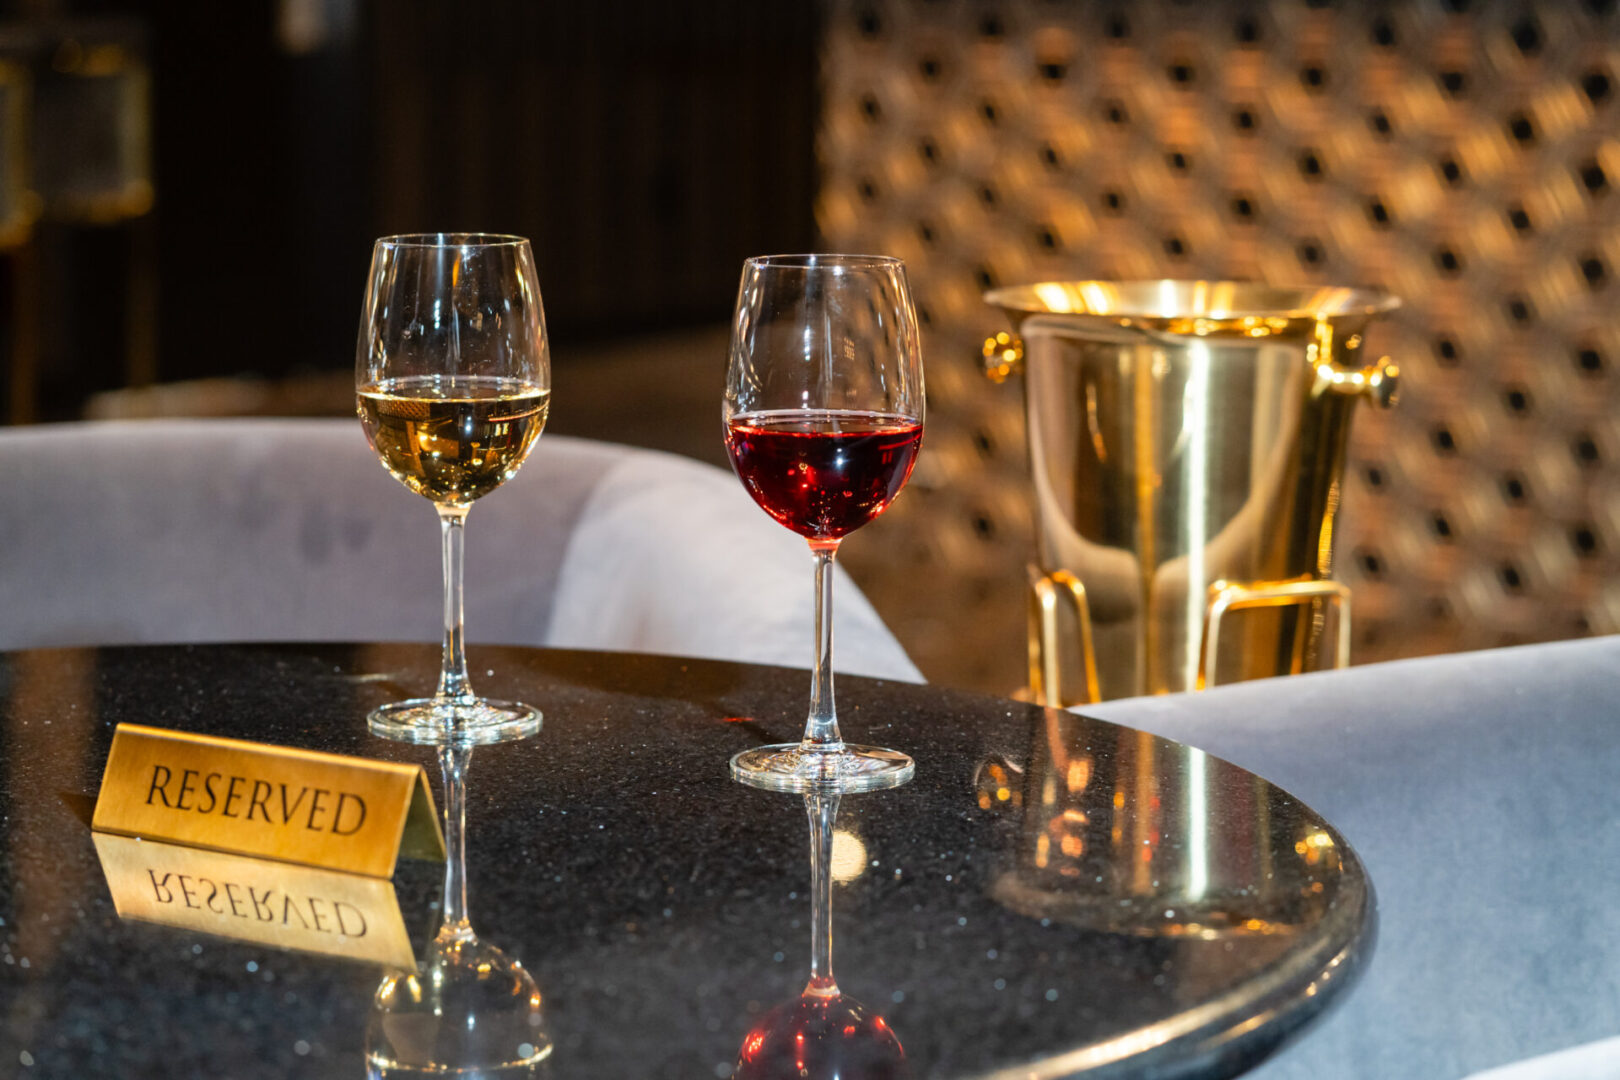 Two glasses of wine on a table next to a gold bucket in a luxury lounge.